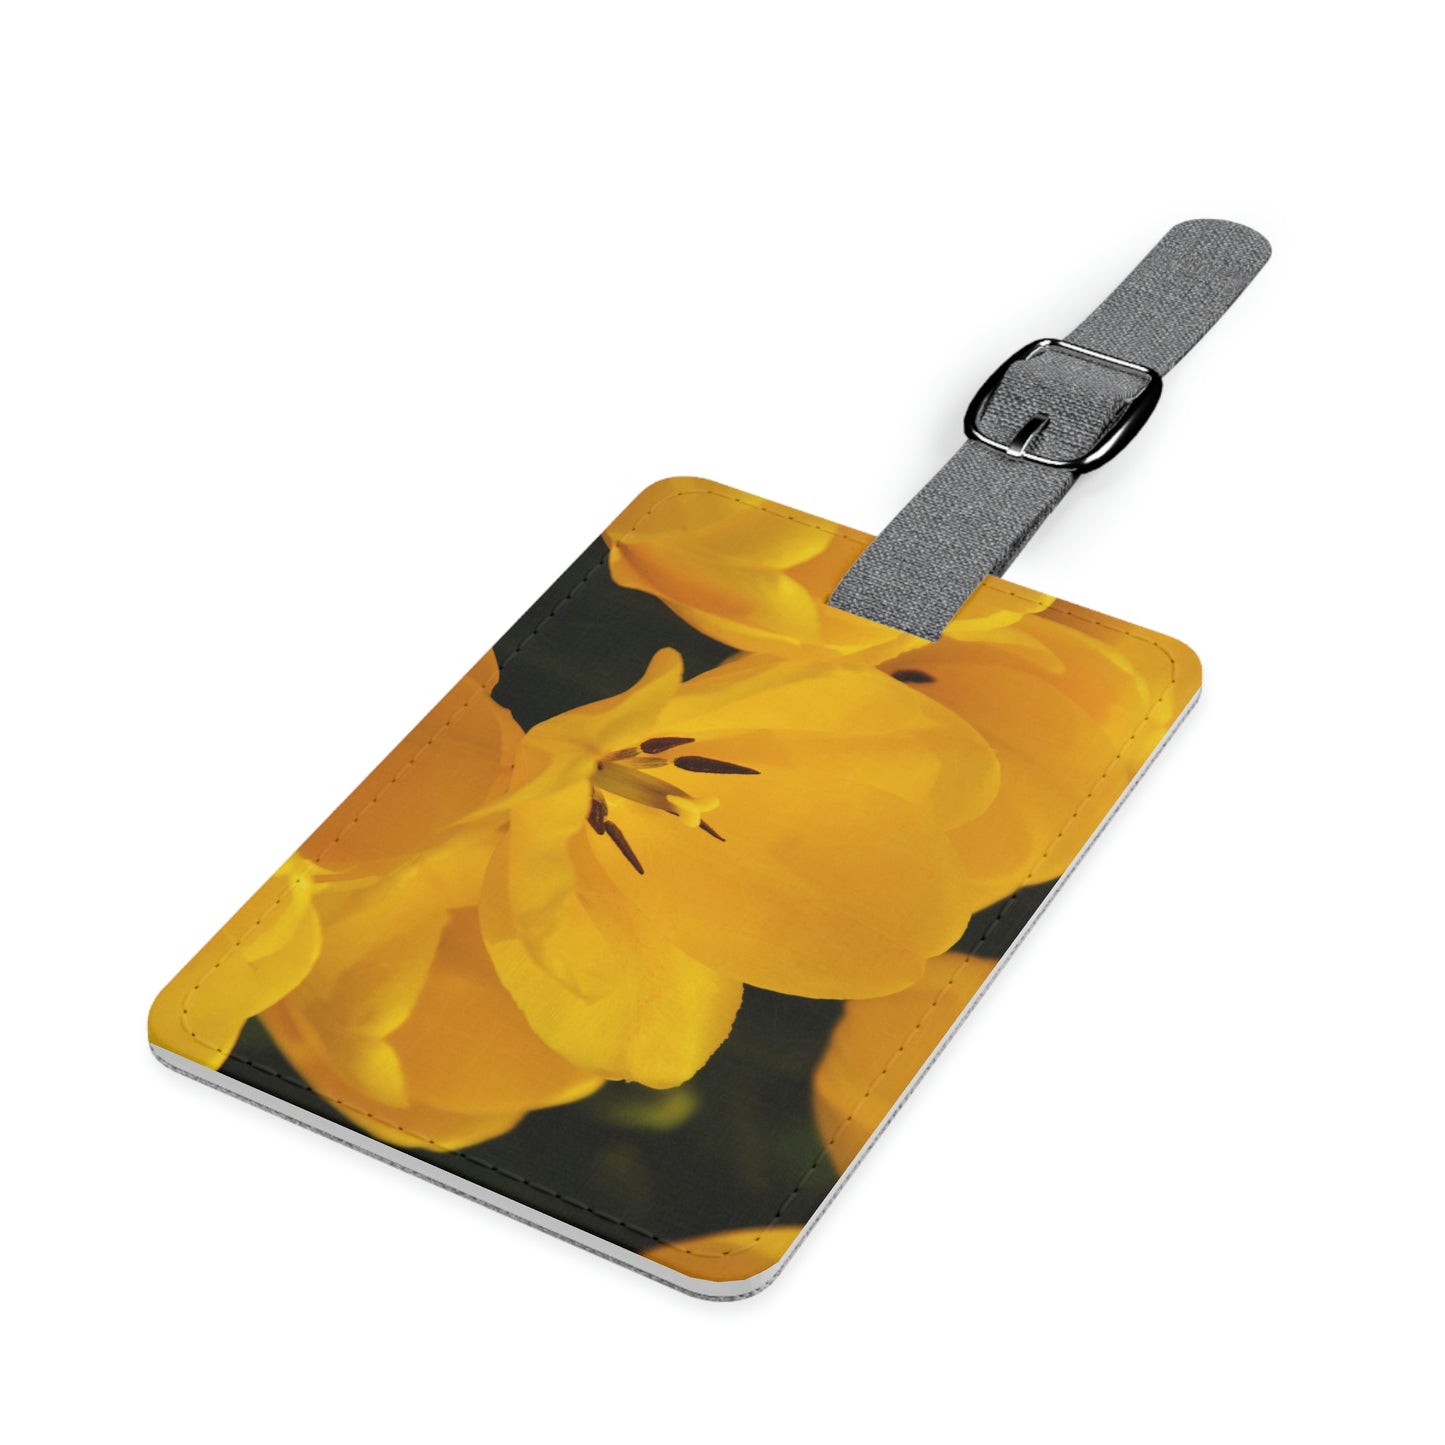 Flowers 16 Saffiano Polyester Luggage Tag, Rectangle